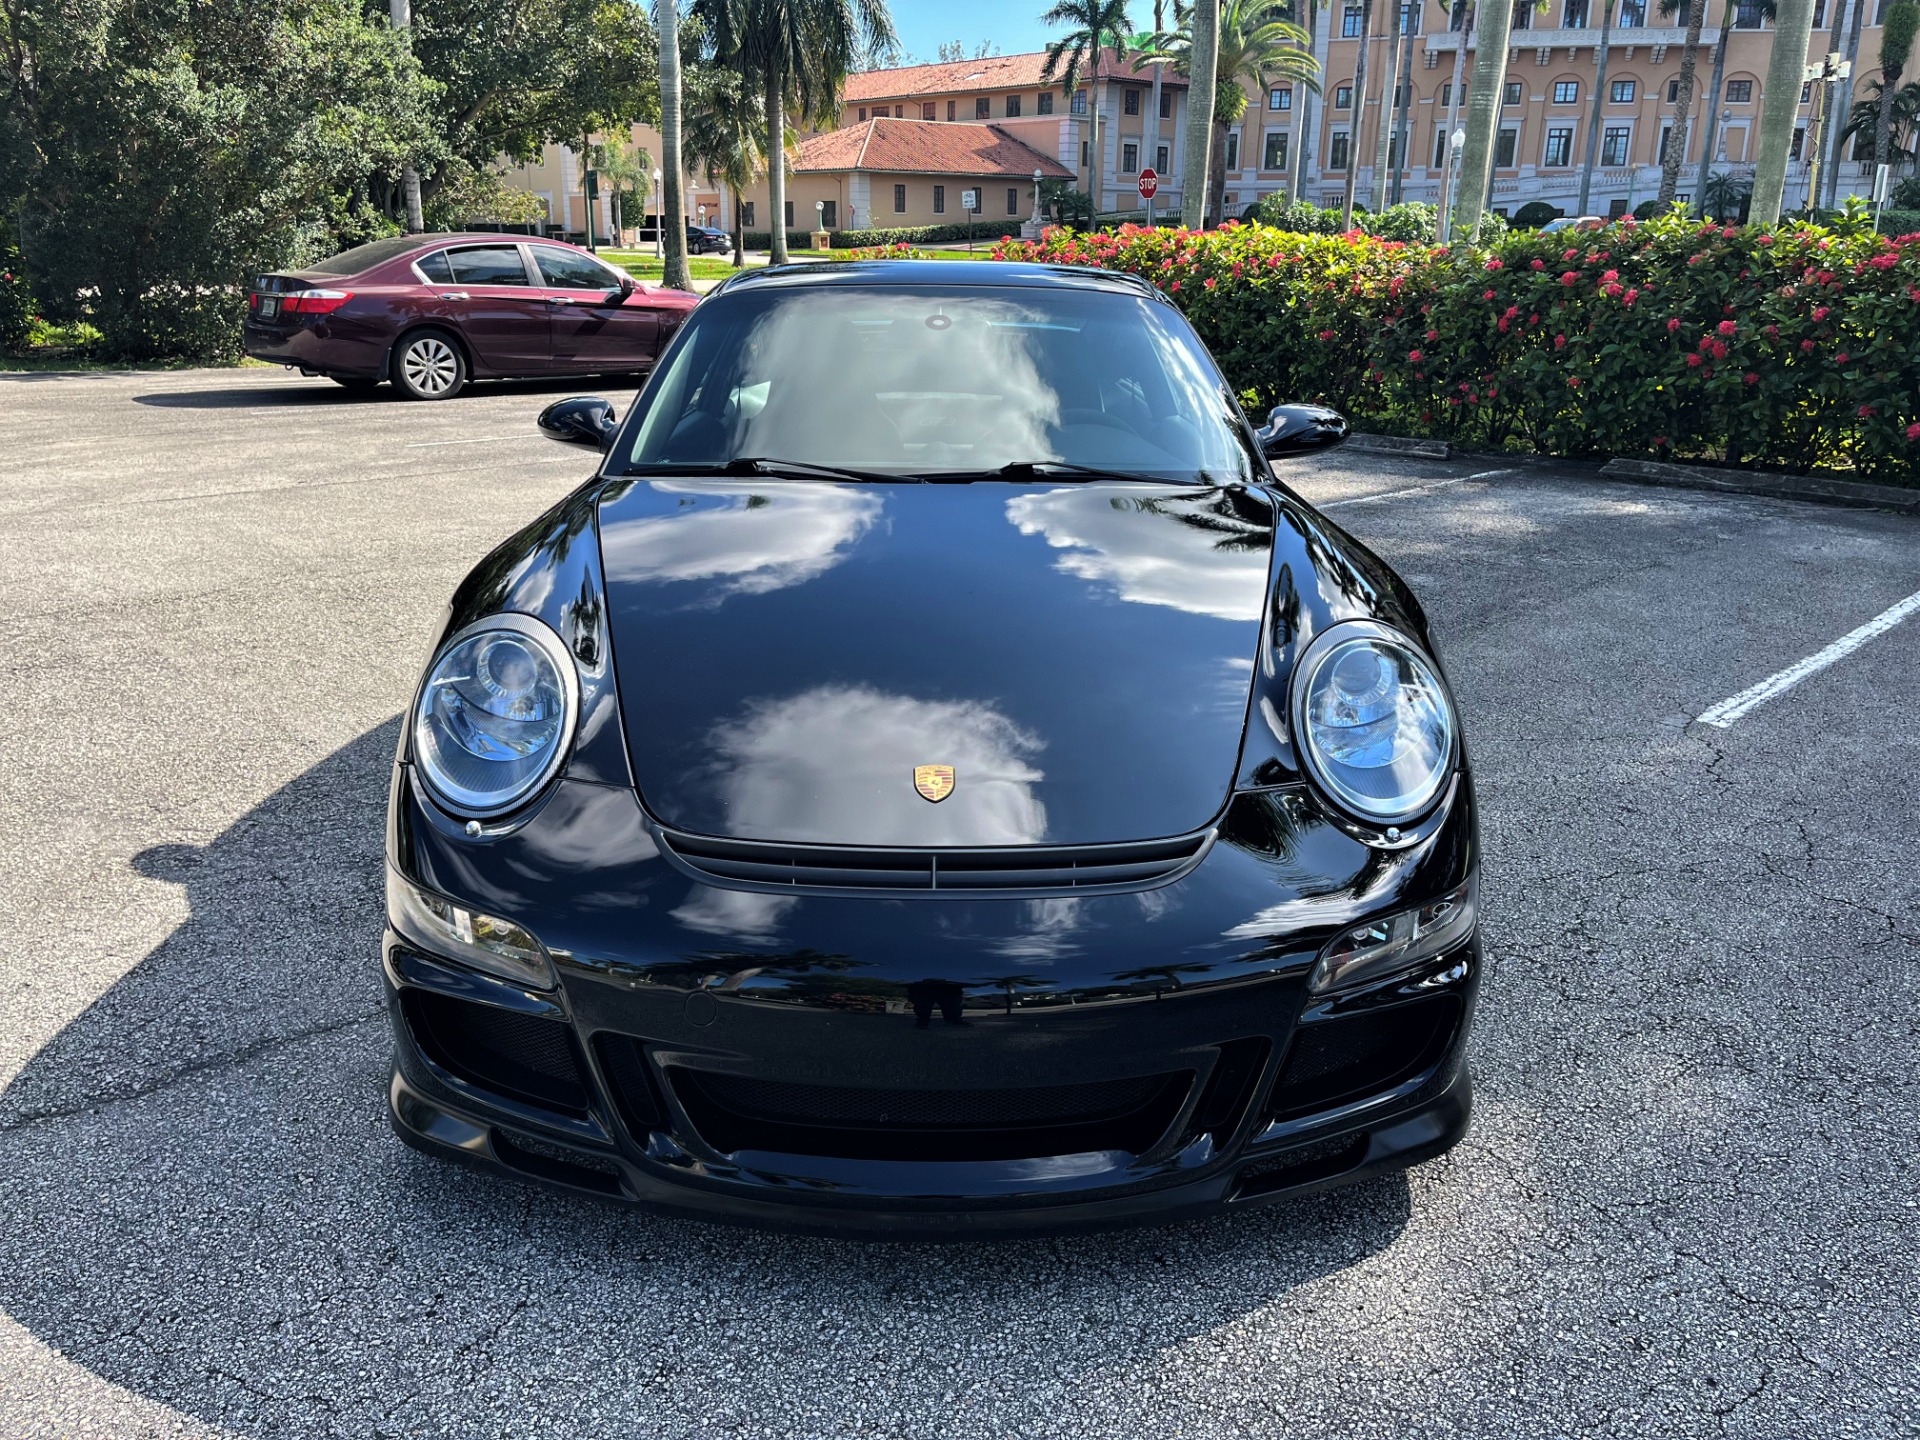 Used 2007 Porsche 911 GT3 for sale Sold at The Gables Sports Cars in Miami FL 33146 3